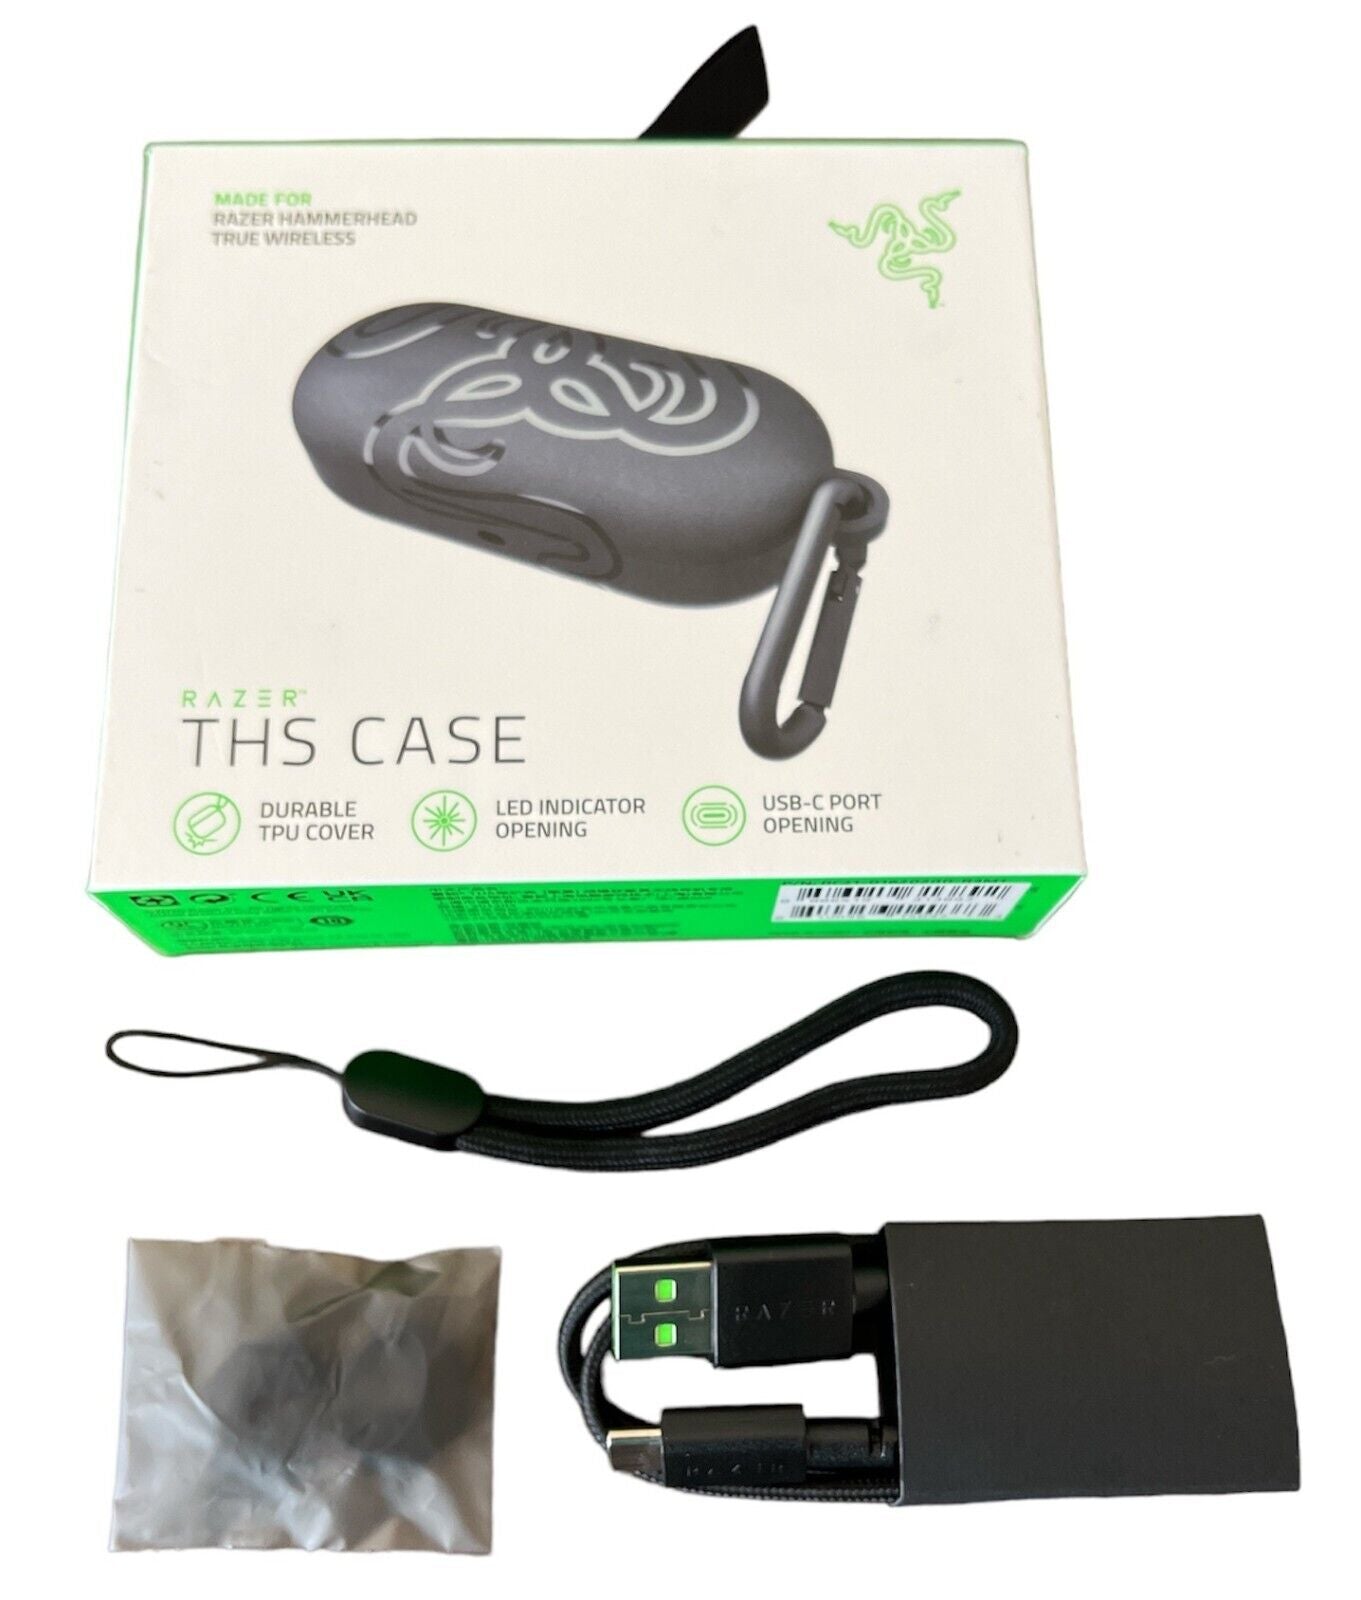 GENUINE Razer Hammerhead Accessory Kit: Charging Cable, Cover, Ear Gels, & Strap